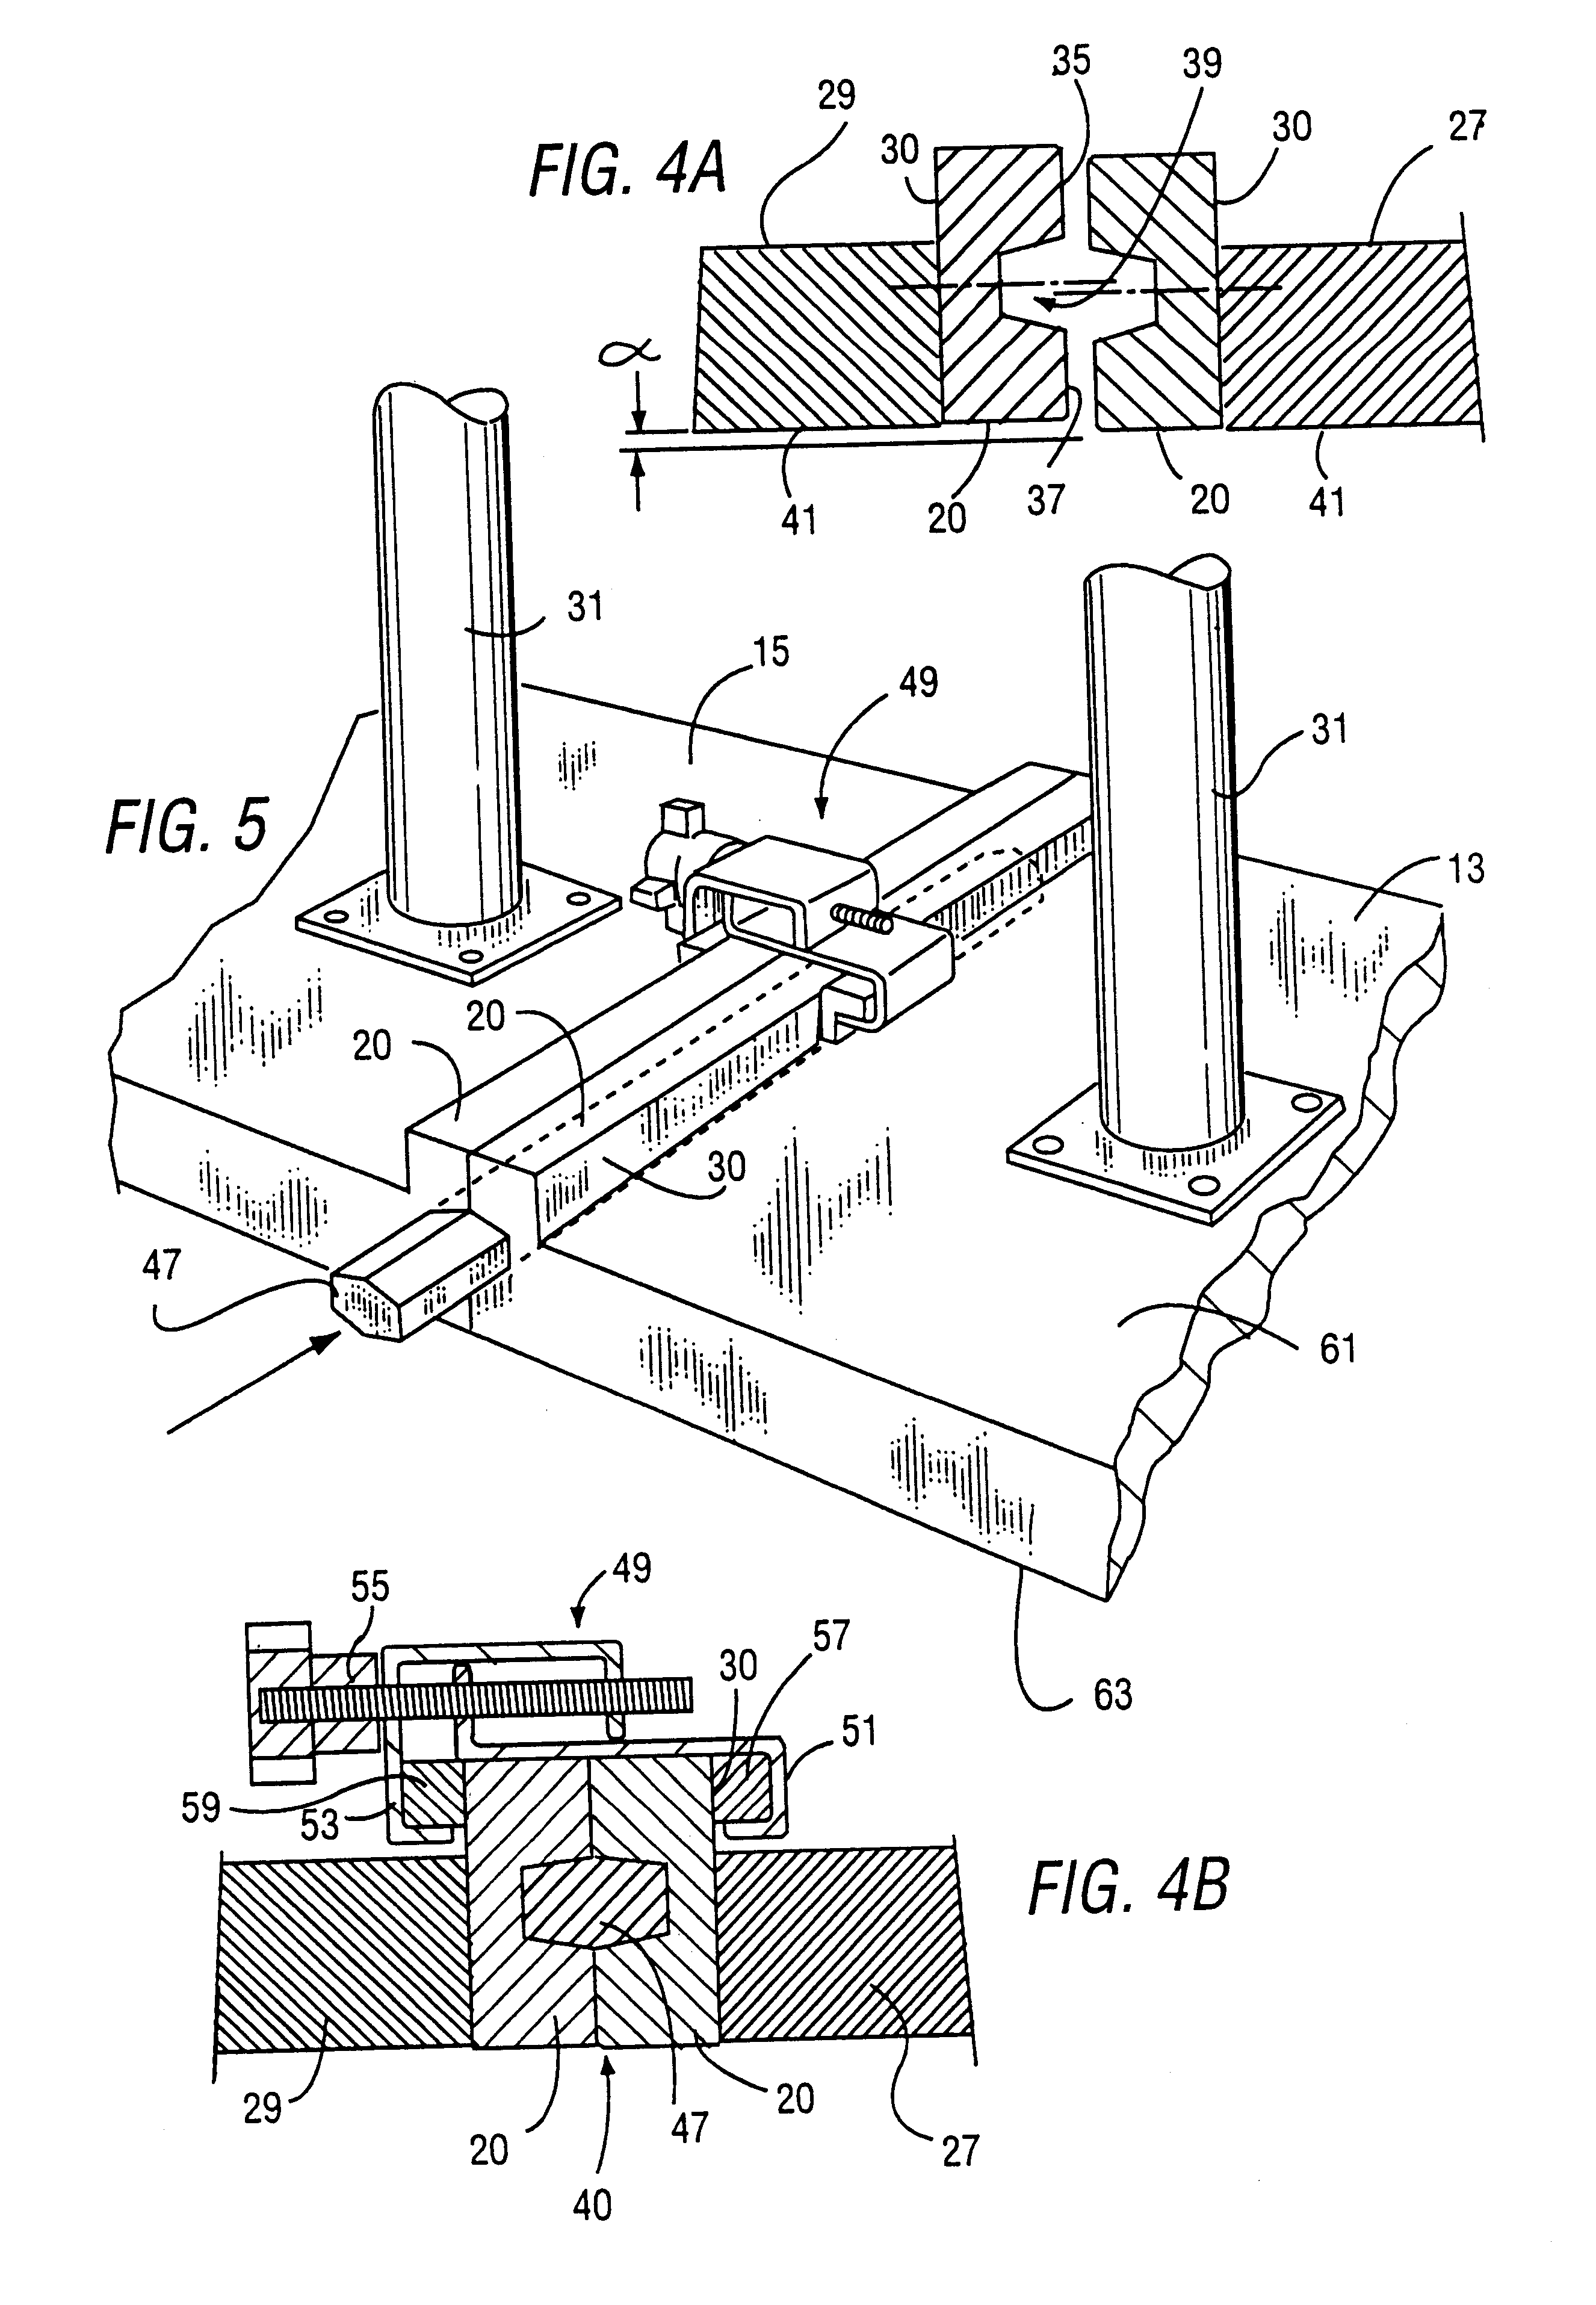 Self-leveling modular table and method of forming a level modular table